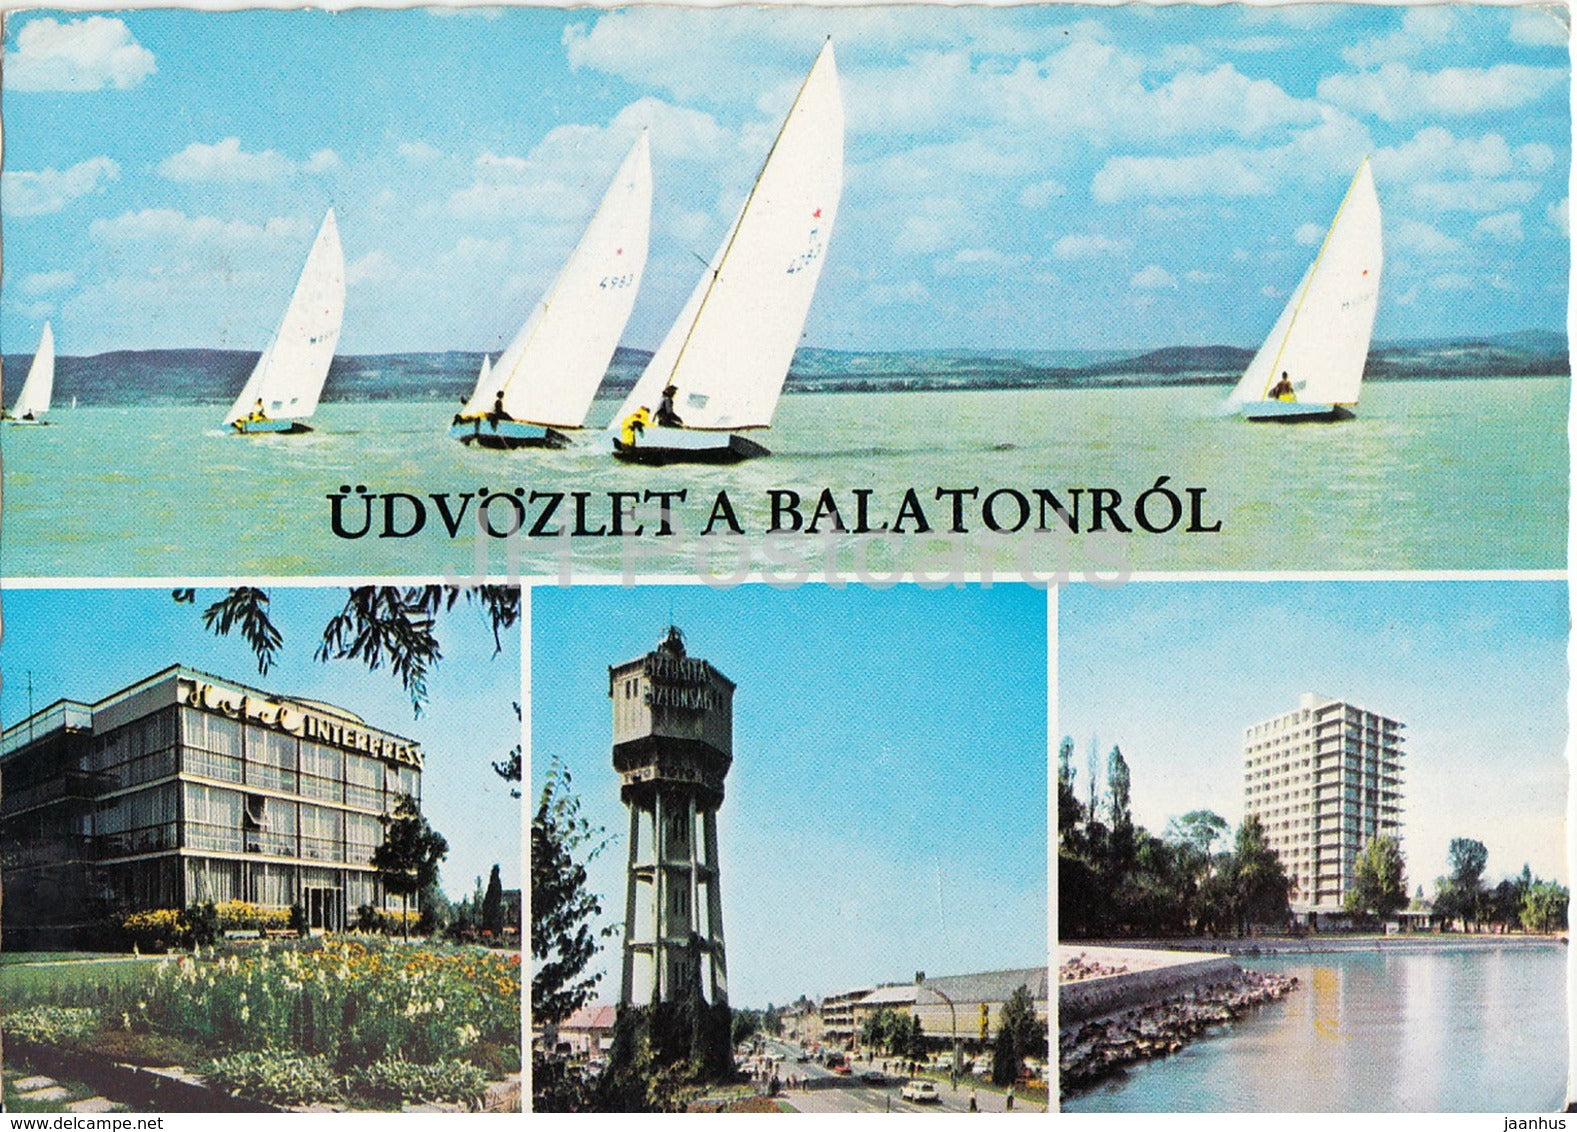 Greetings from the lake Balaton - sailing boat - hotel - lighthouse - multiview - 1970s - Hungary - used - JH Postcards